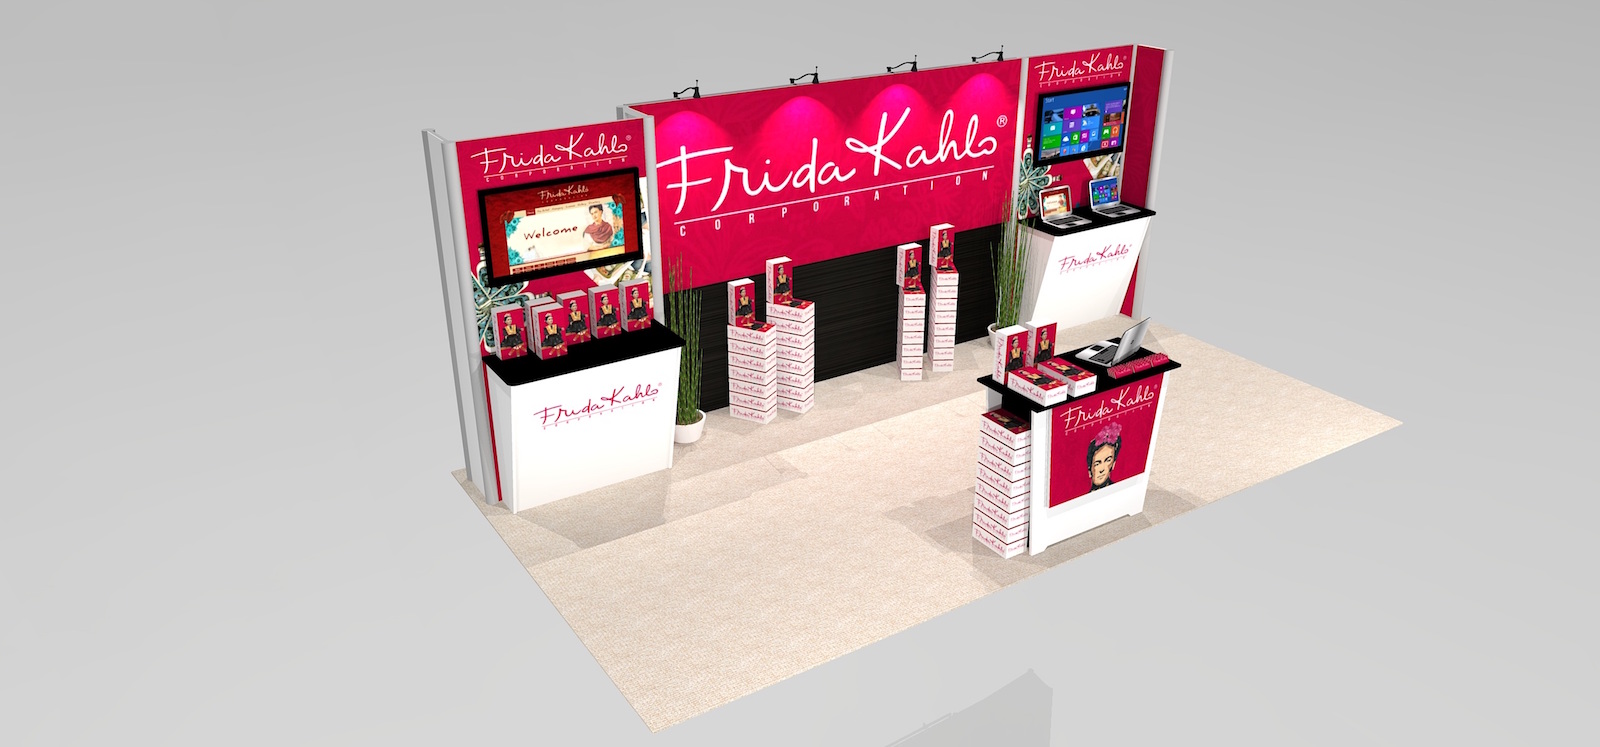 IM11 Trade Show Display with storage and backlit trade show graphics two flatscreens